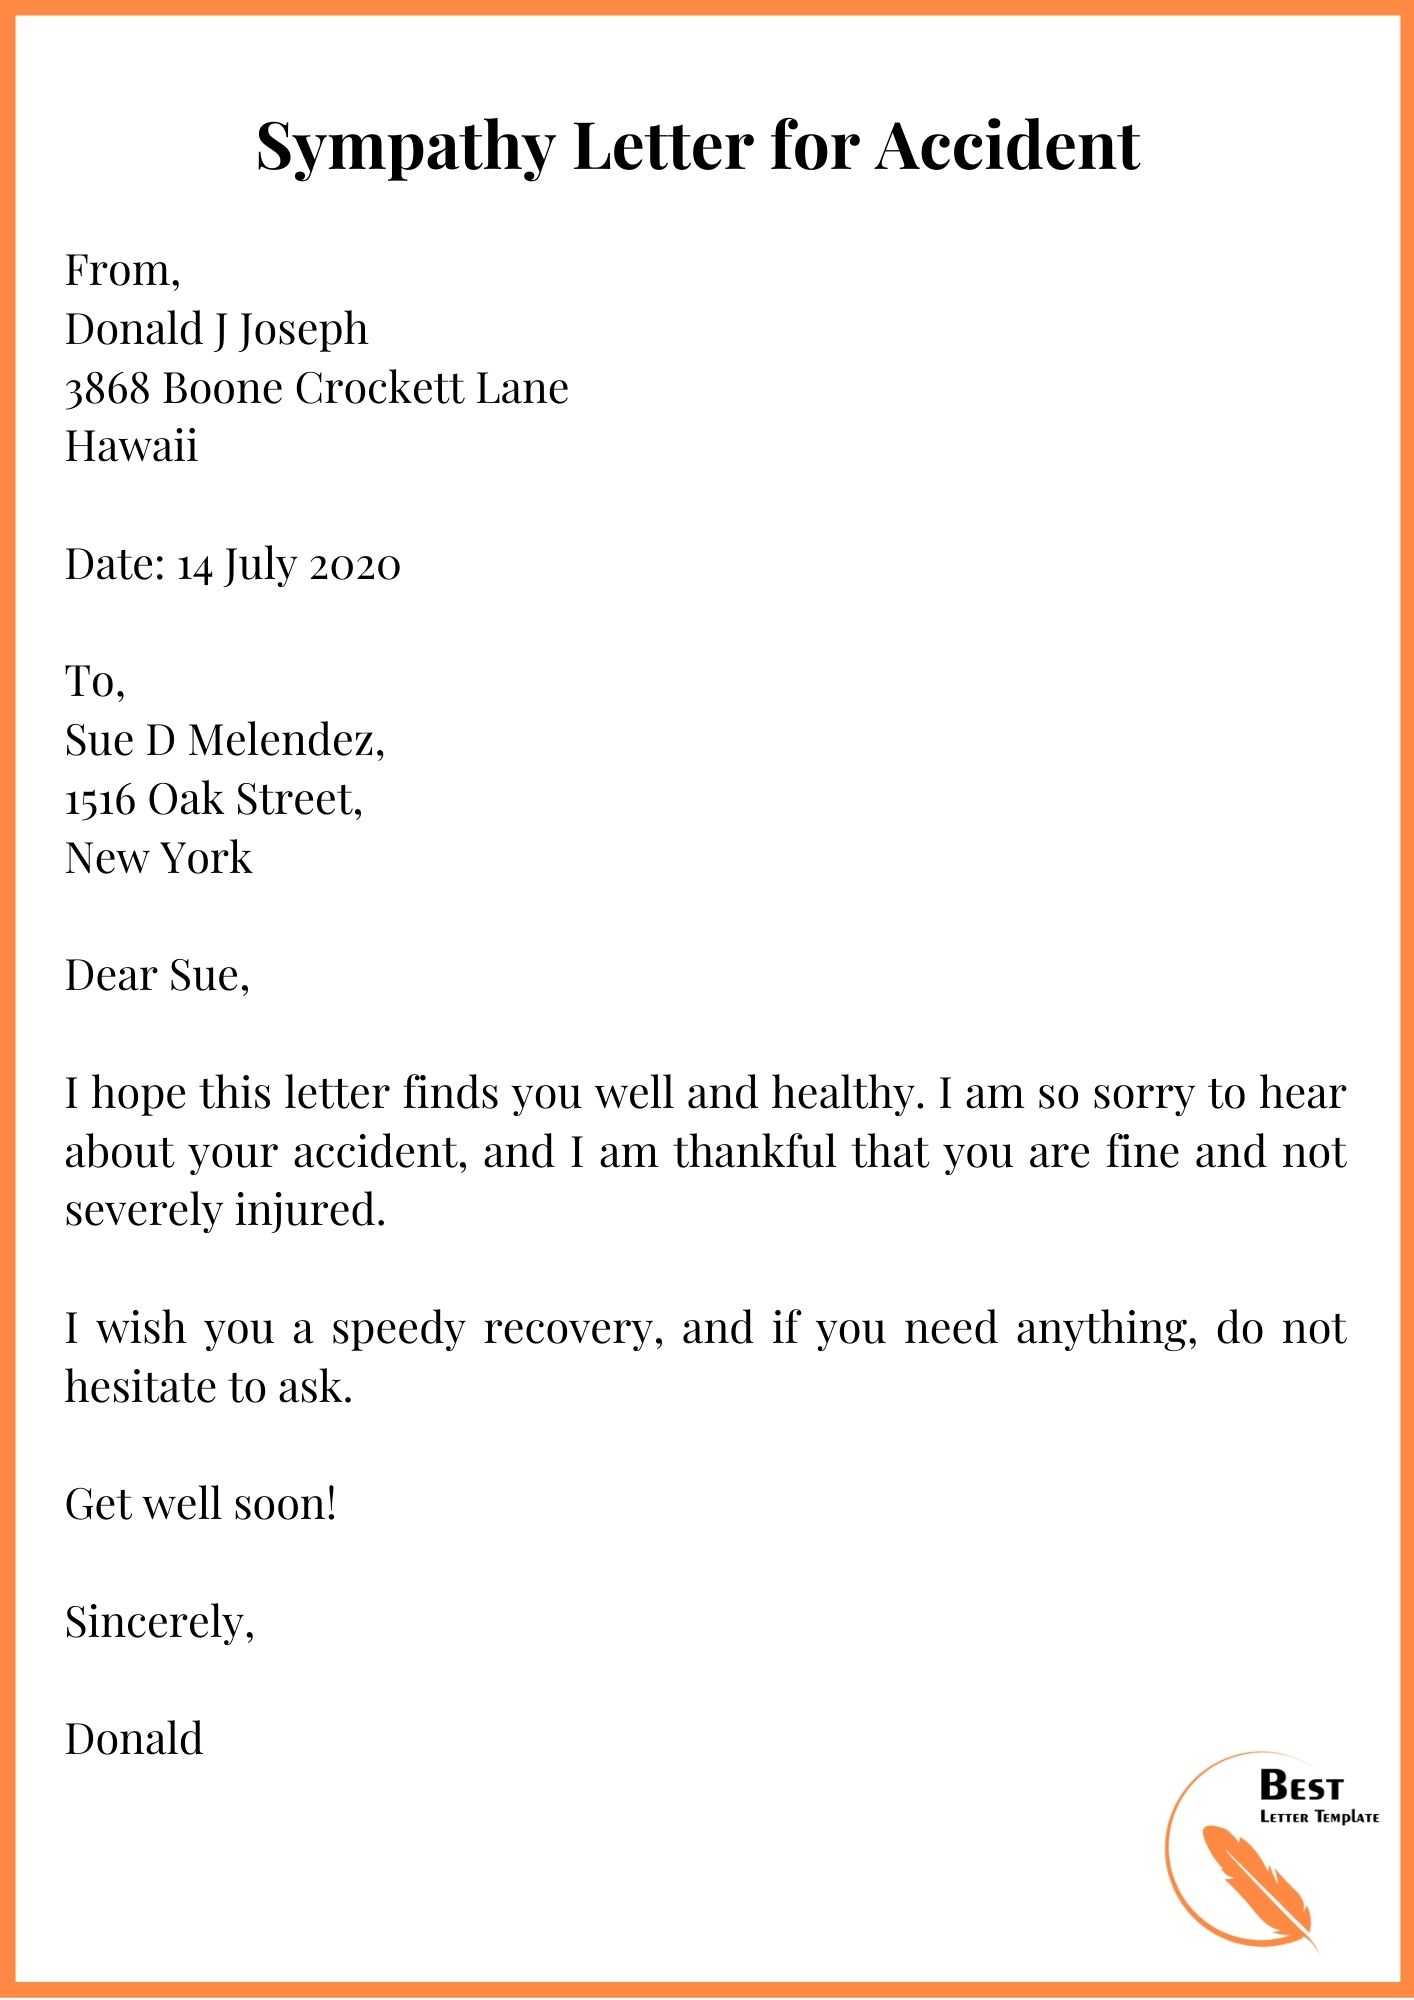 Sympathy Letter Template Format, Sample & Examples